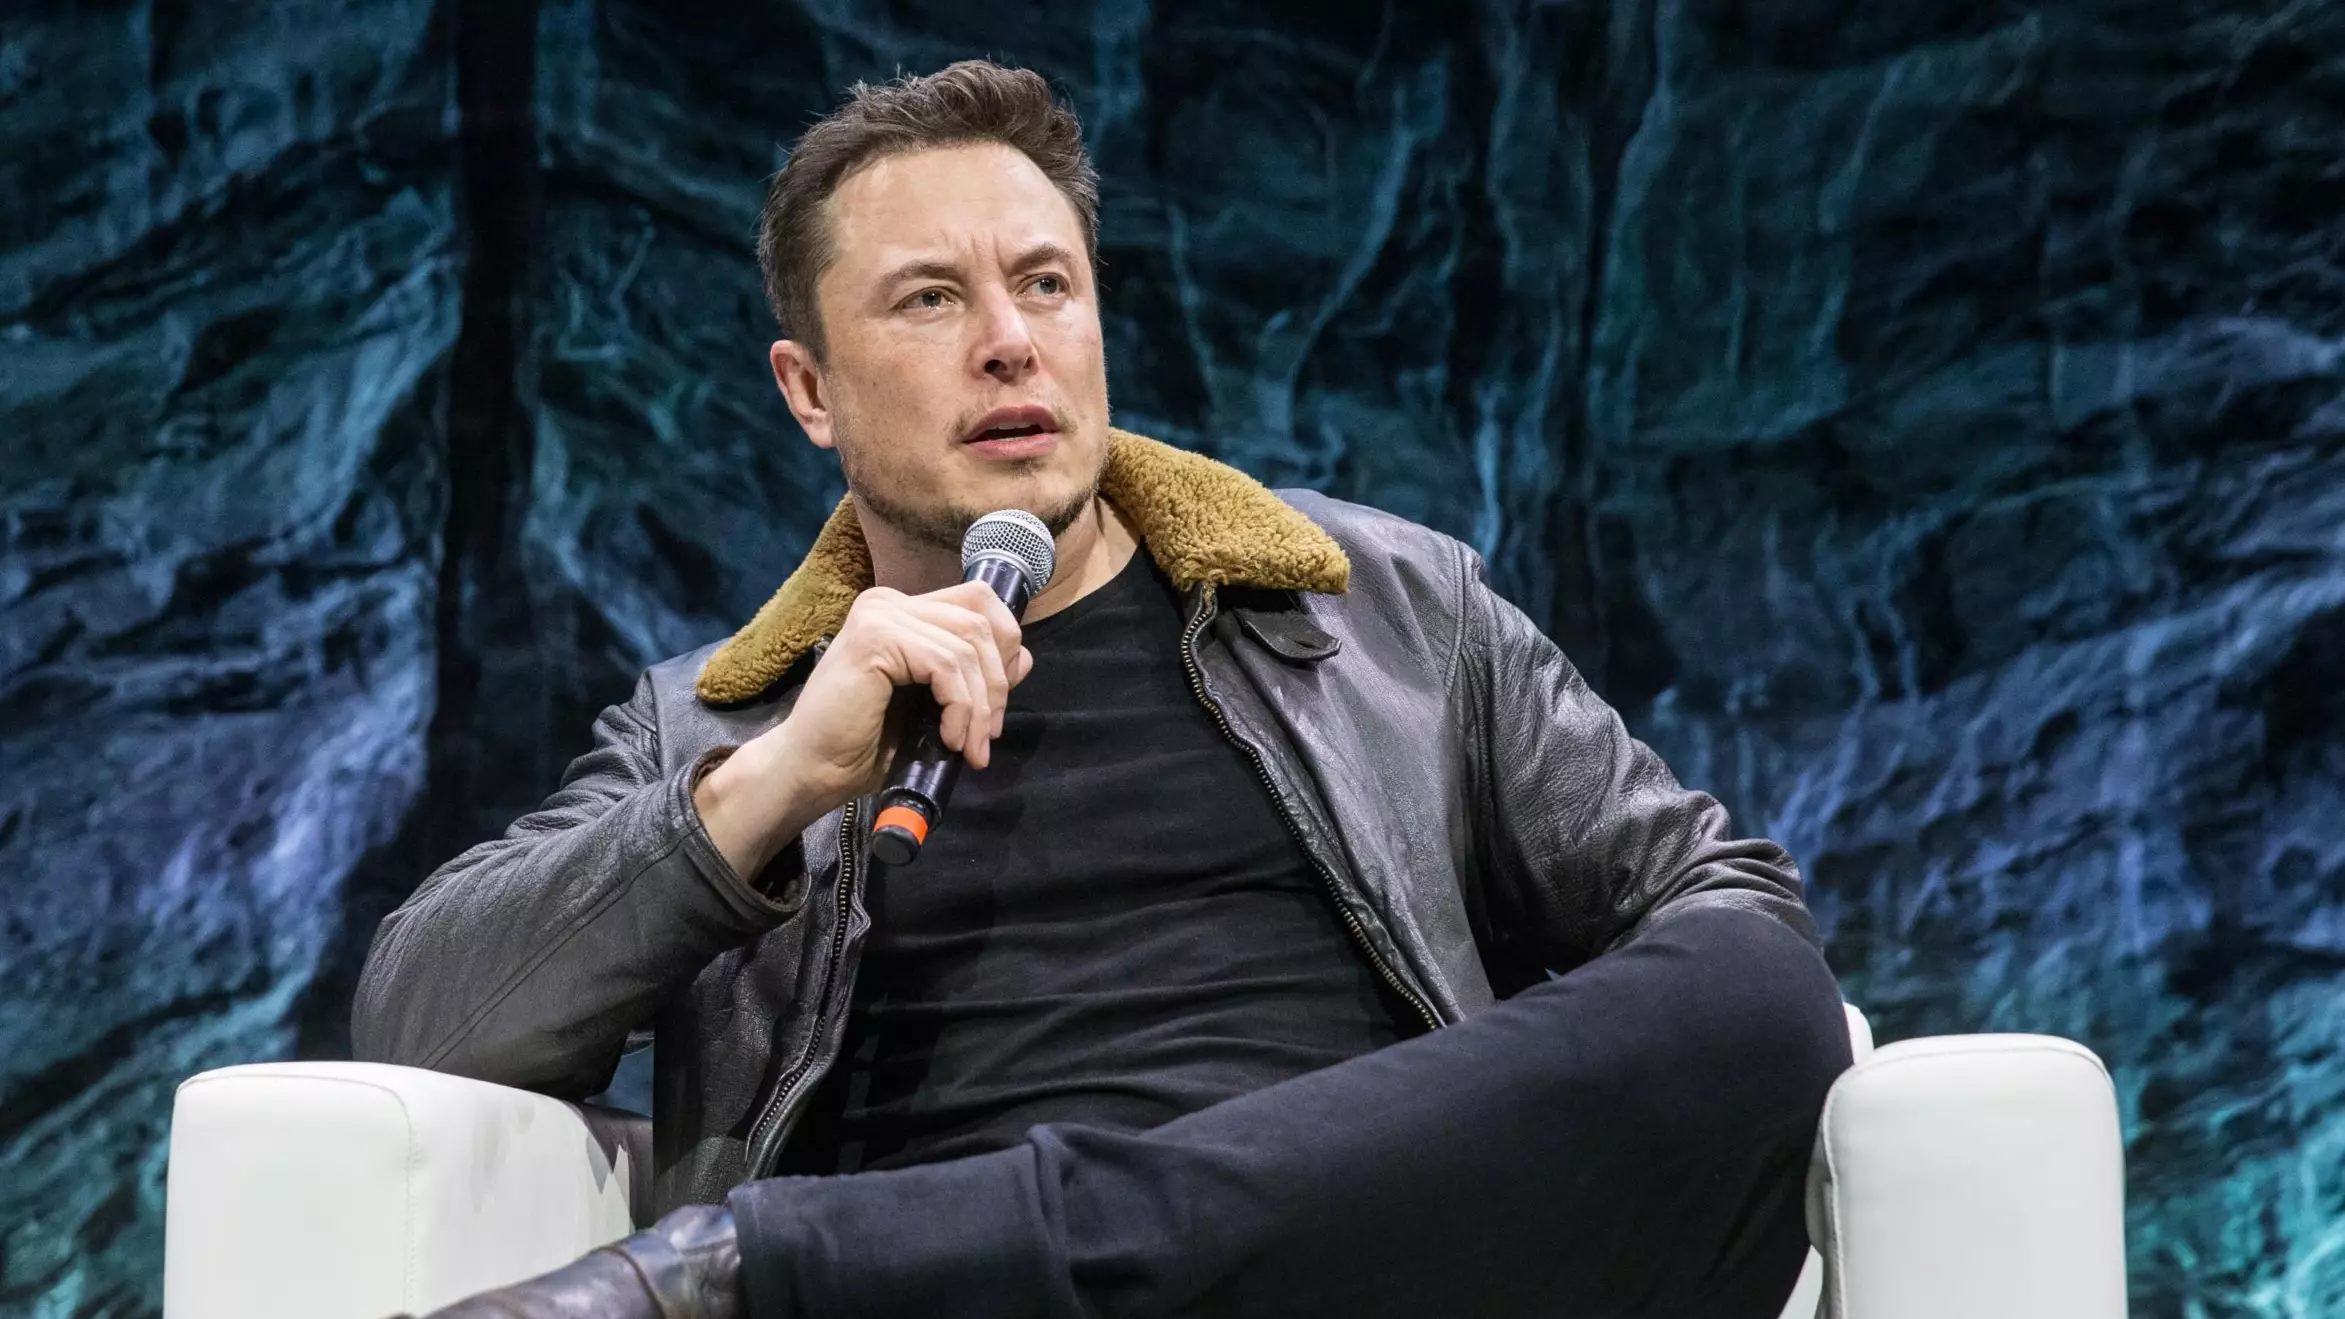 Woman Given Elon Musk's Old Phone Number Inundated With Calls And Messages For Him